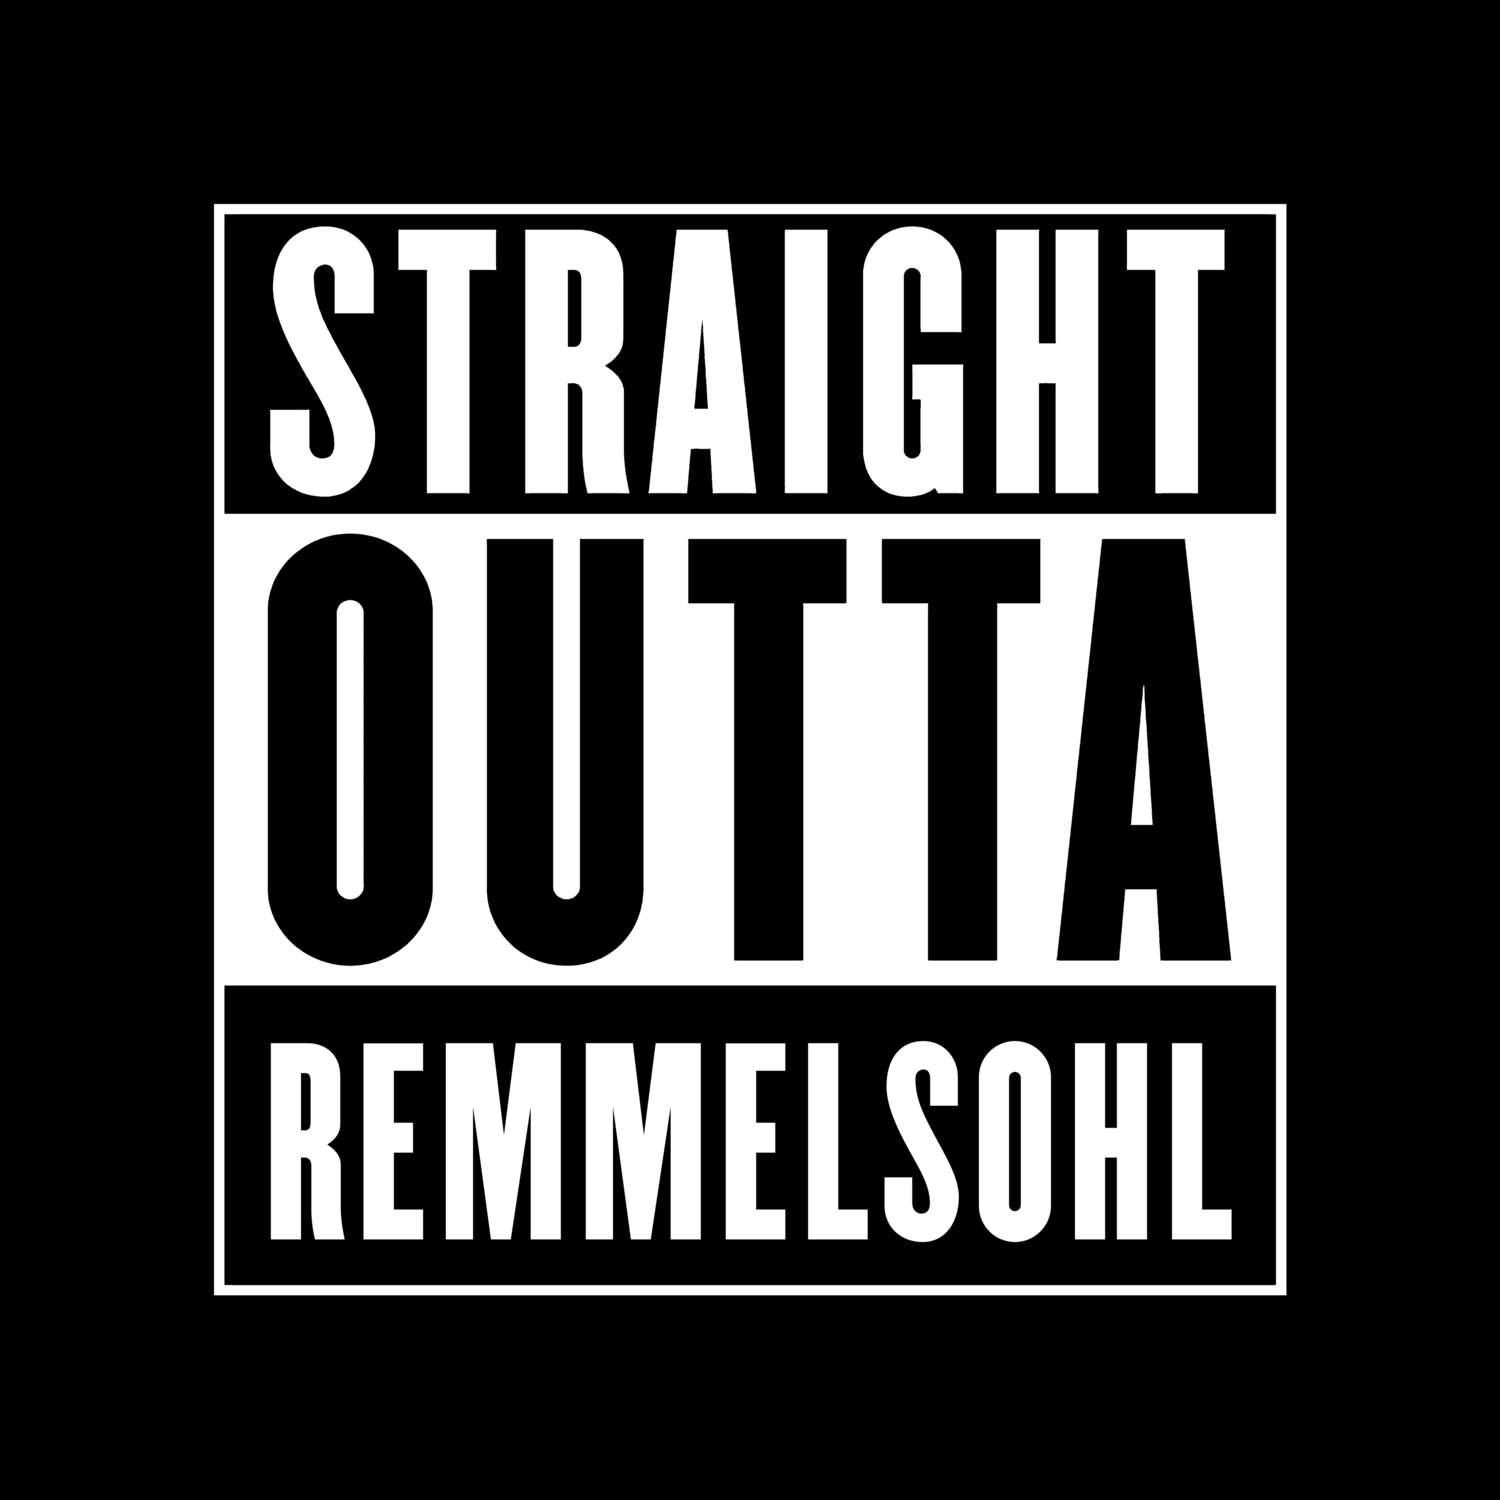 Remmelsohl T-Shirt »Straight Outta«